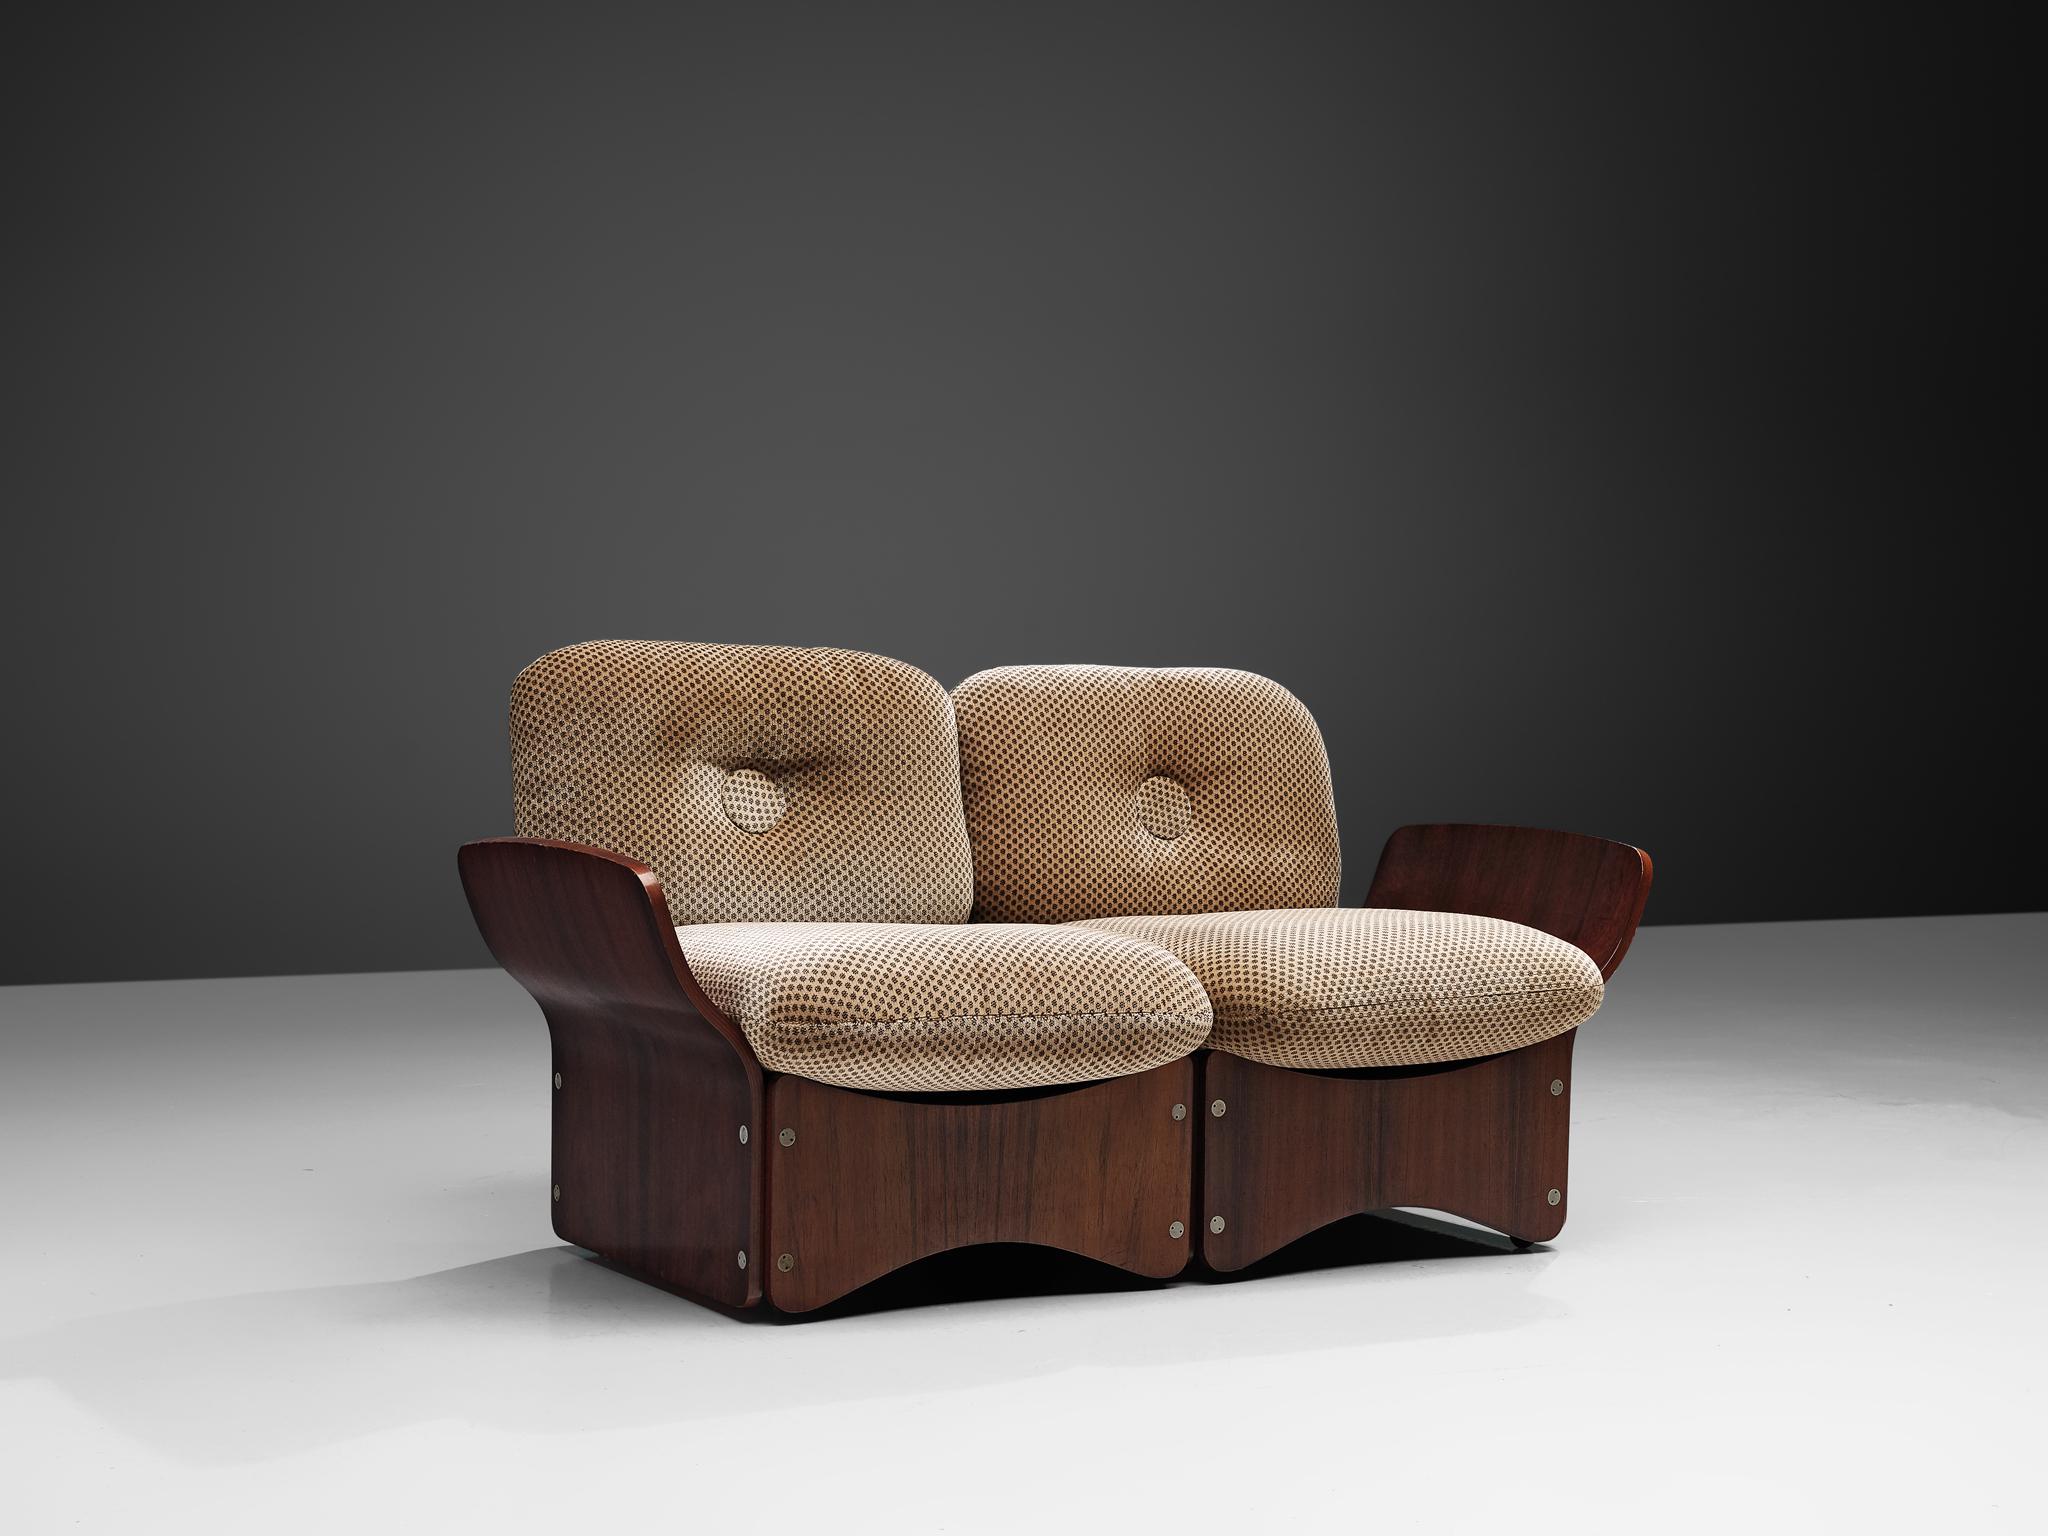 Max Glendinning for Race Furniture, settee, rosewood, metal, fabric, United Kingdom, 1967.

A 'Pica' sofa that is part of the Maximus Range for Race Furniture designed by Max Clendinning in 1967. It consists of a rosewood veneered plywood frame. The